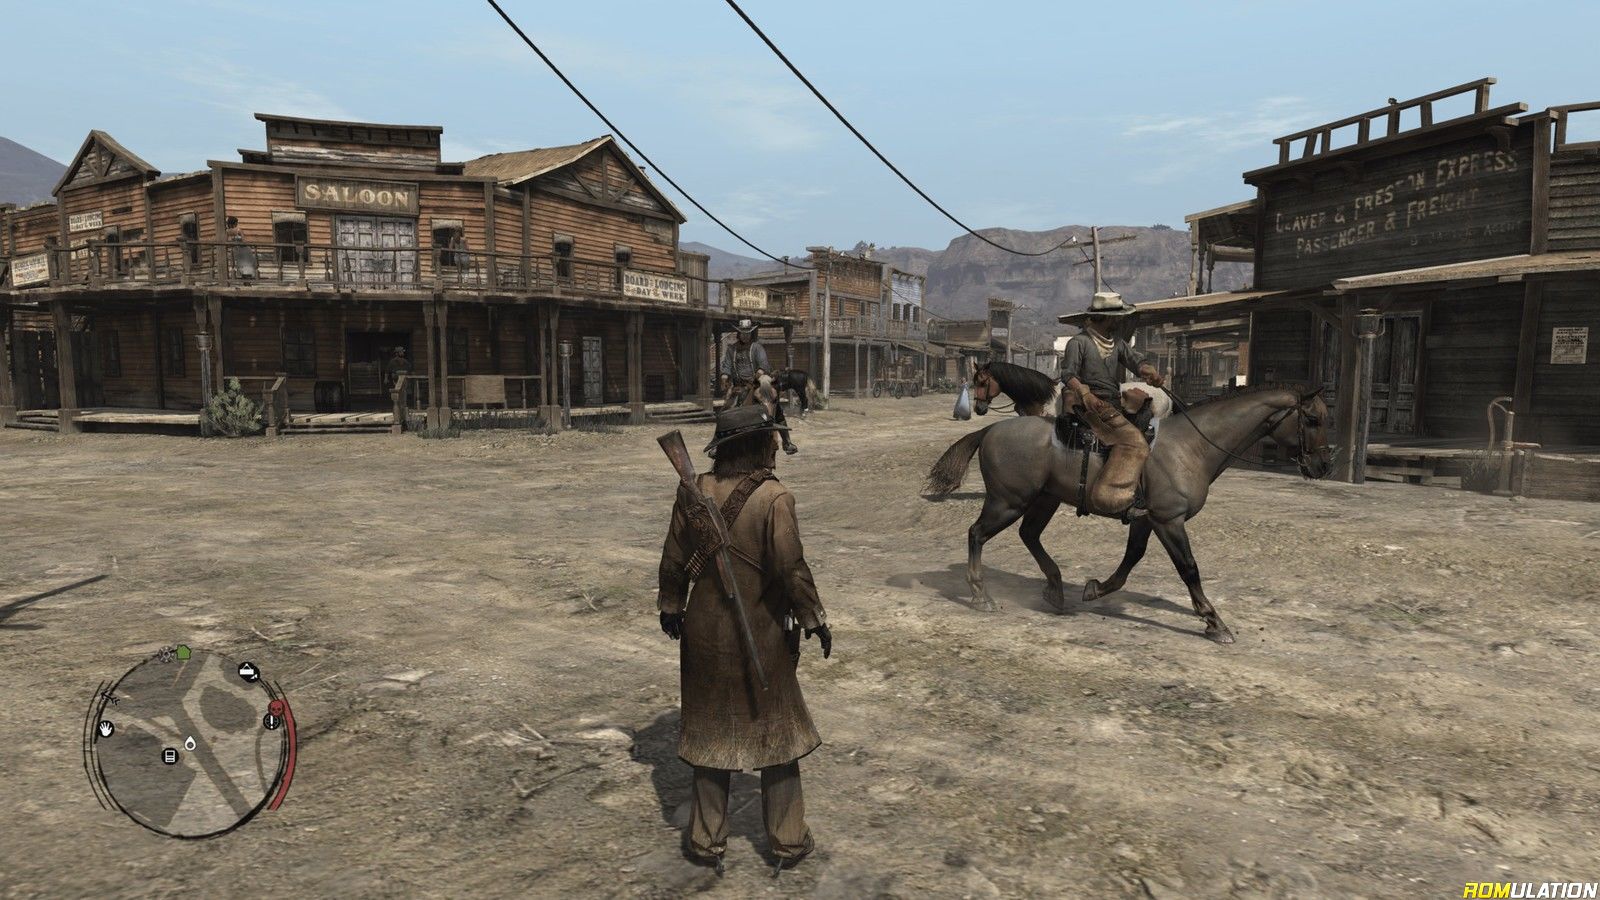 Resignation Donation spurv Red Dead Redemption GOTY Edition (Europe) Sony PlayStation 3 (PS3) ISO  Download - RomUlation